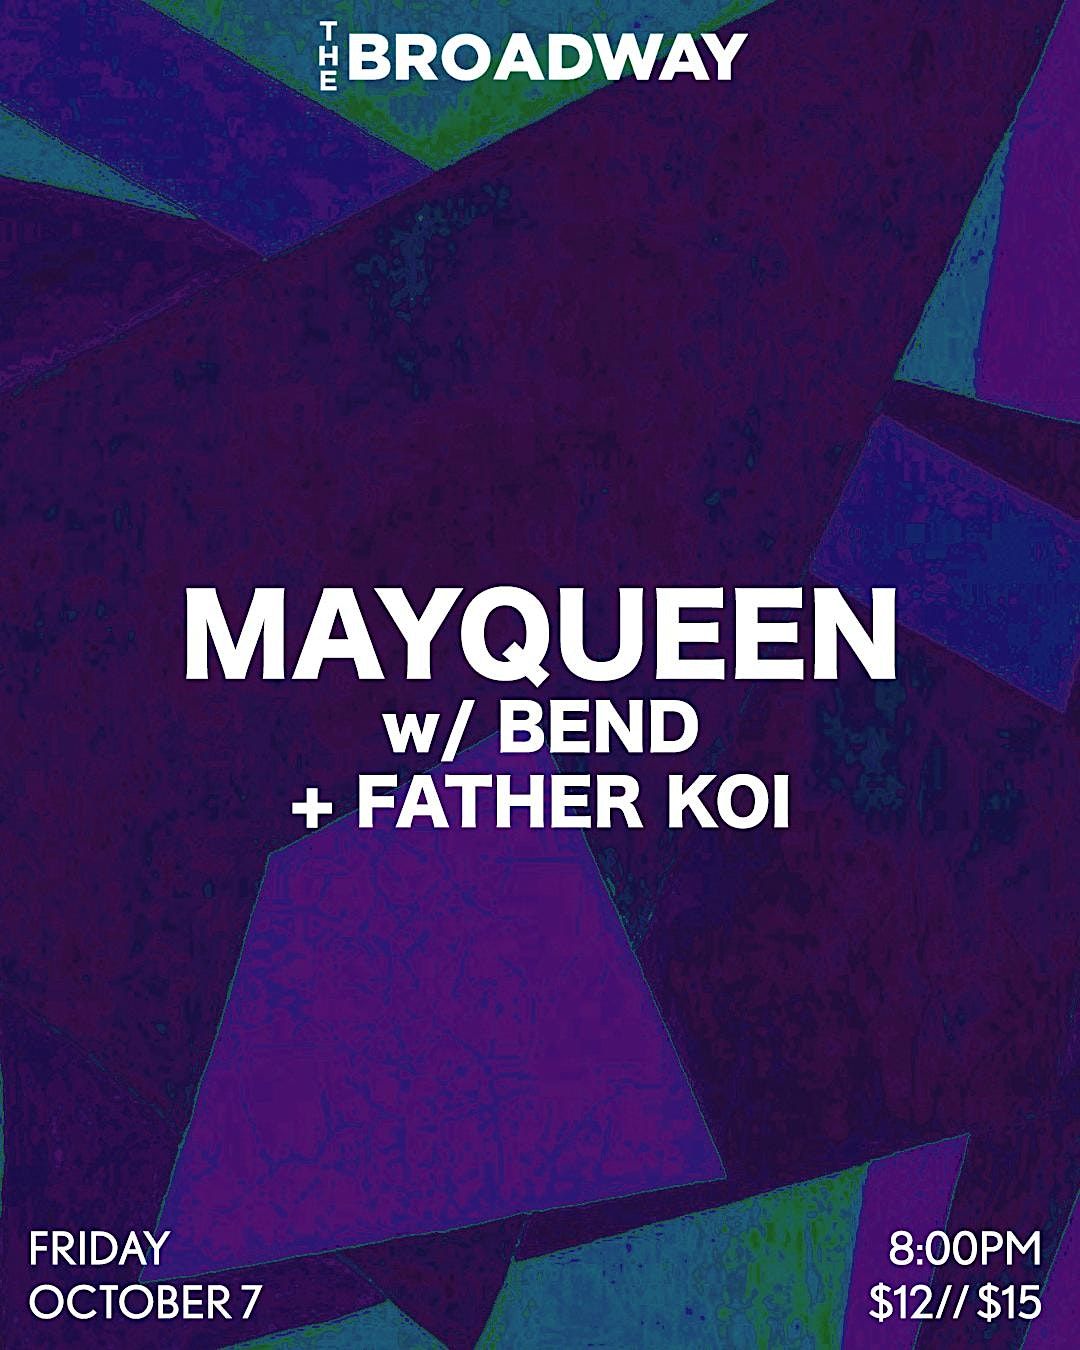 MayQueen w\/ BEND and Father Koi